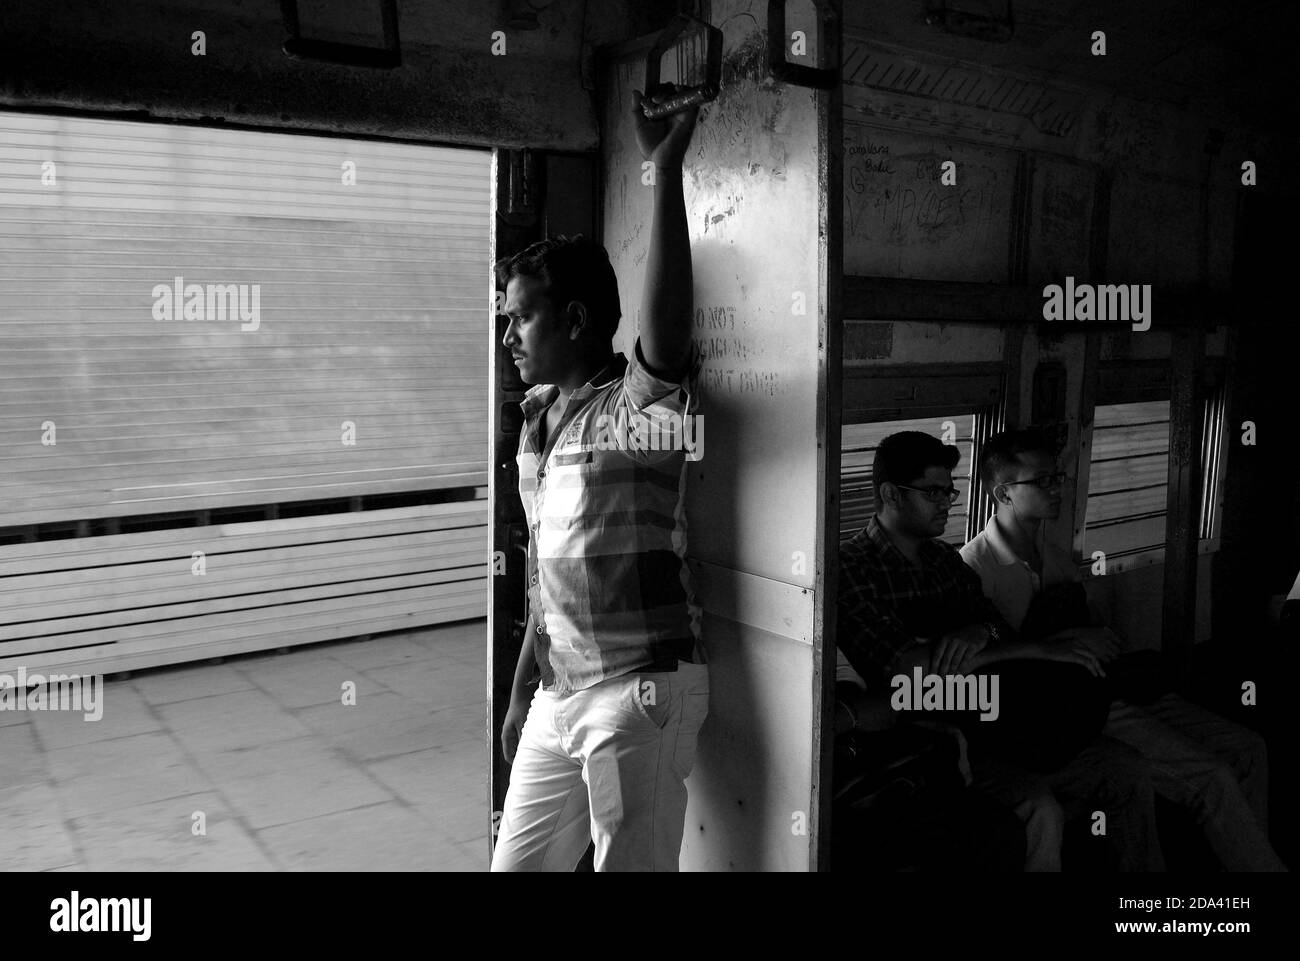 Chennai, Tamil Nadu, India - March, 2014: Portrait of Indin man inside city metro train with open doors. People in Chennai suburban train car. Made in Stock Photo